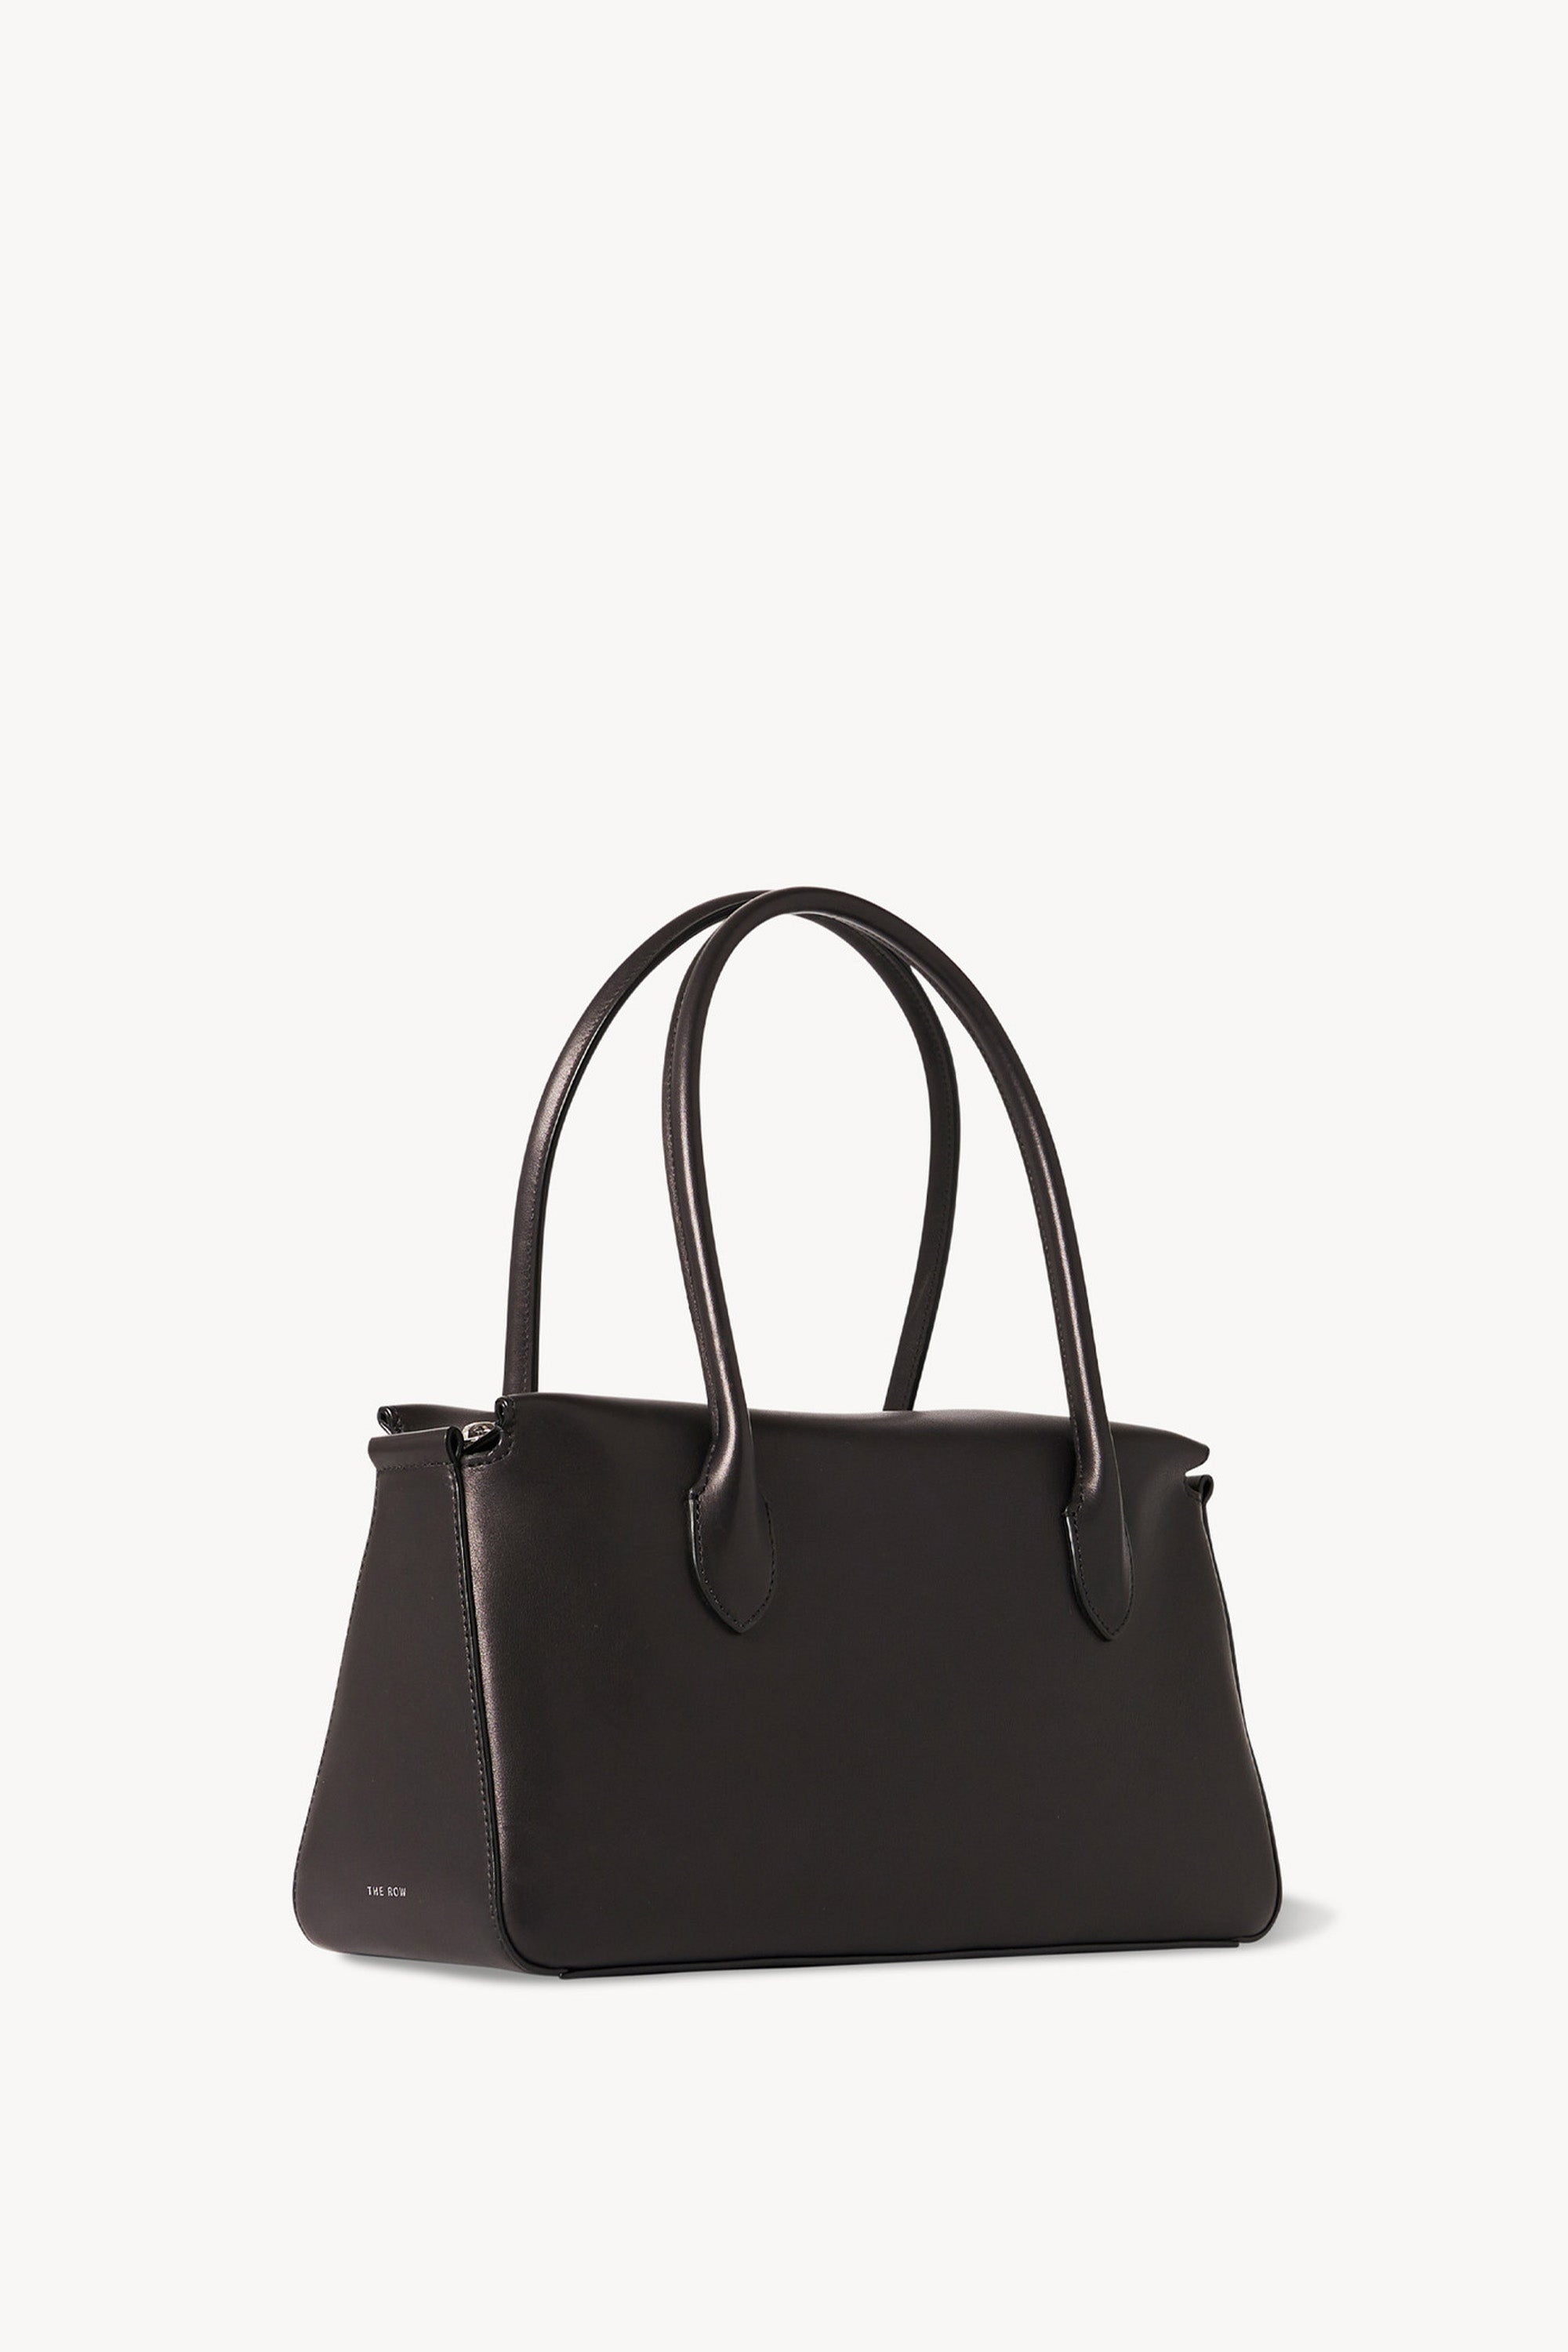 E/W Top Handle Bag in Leather - 2